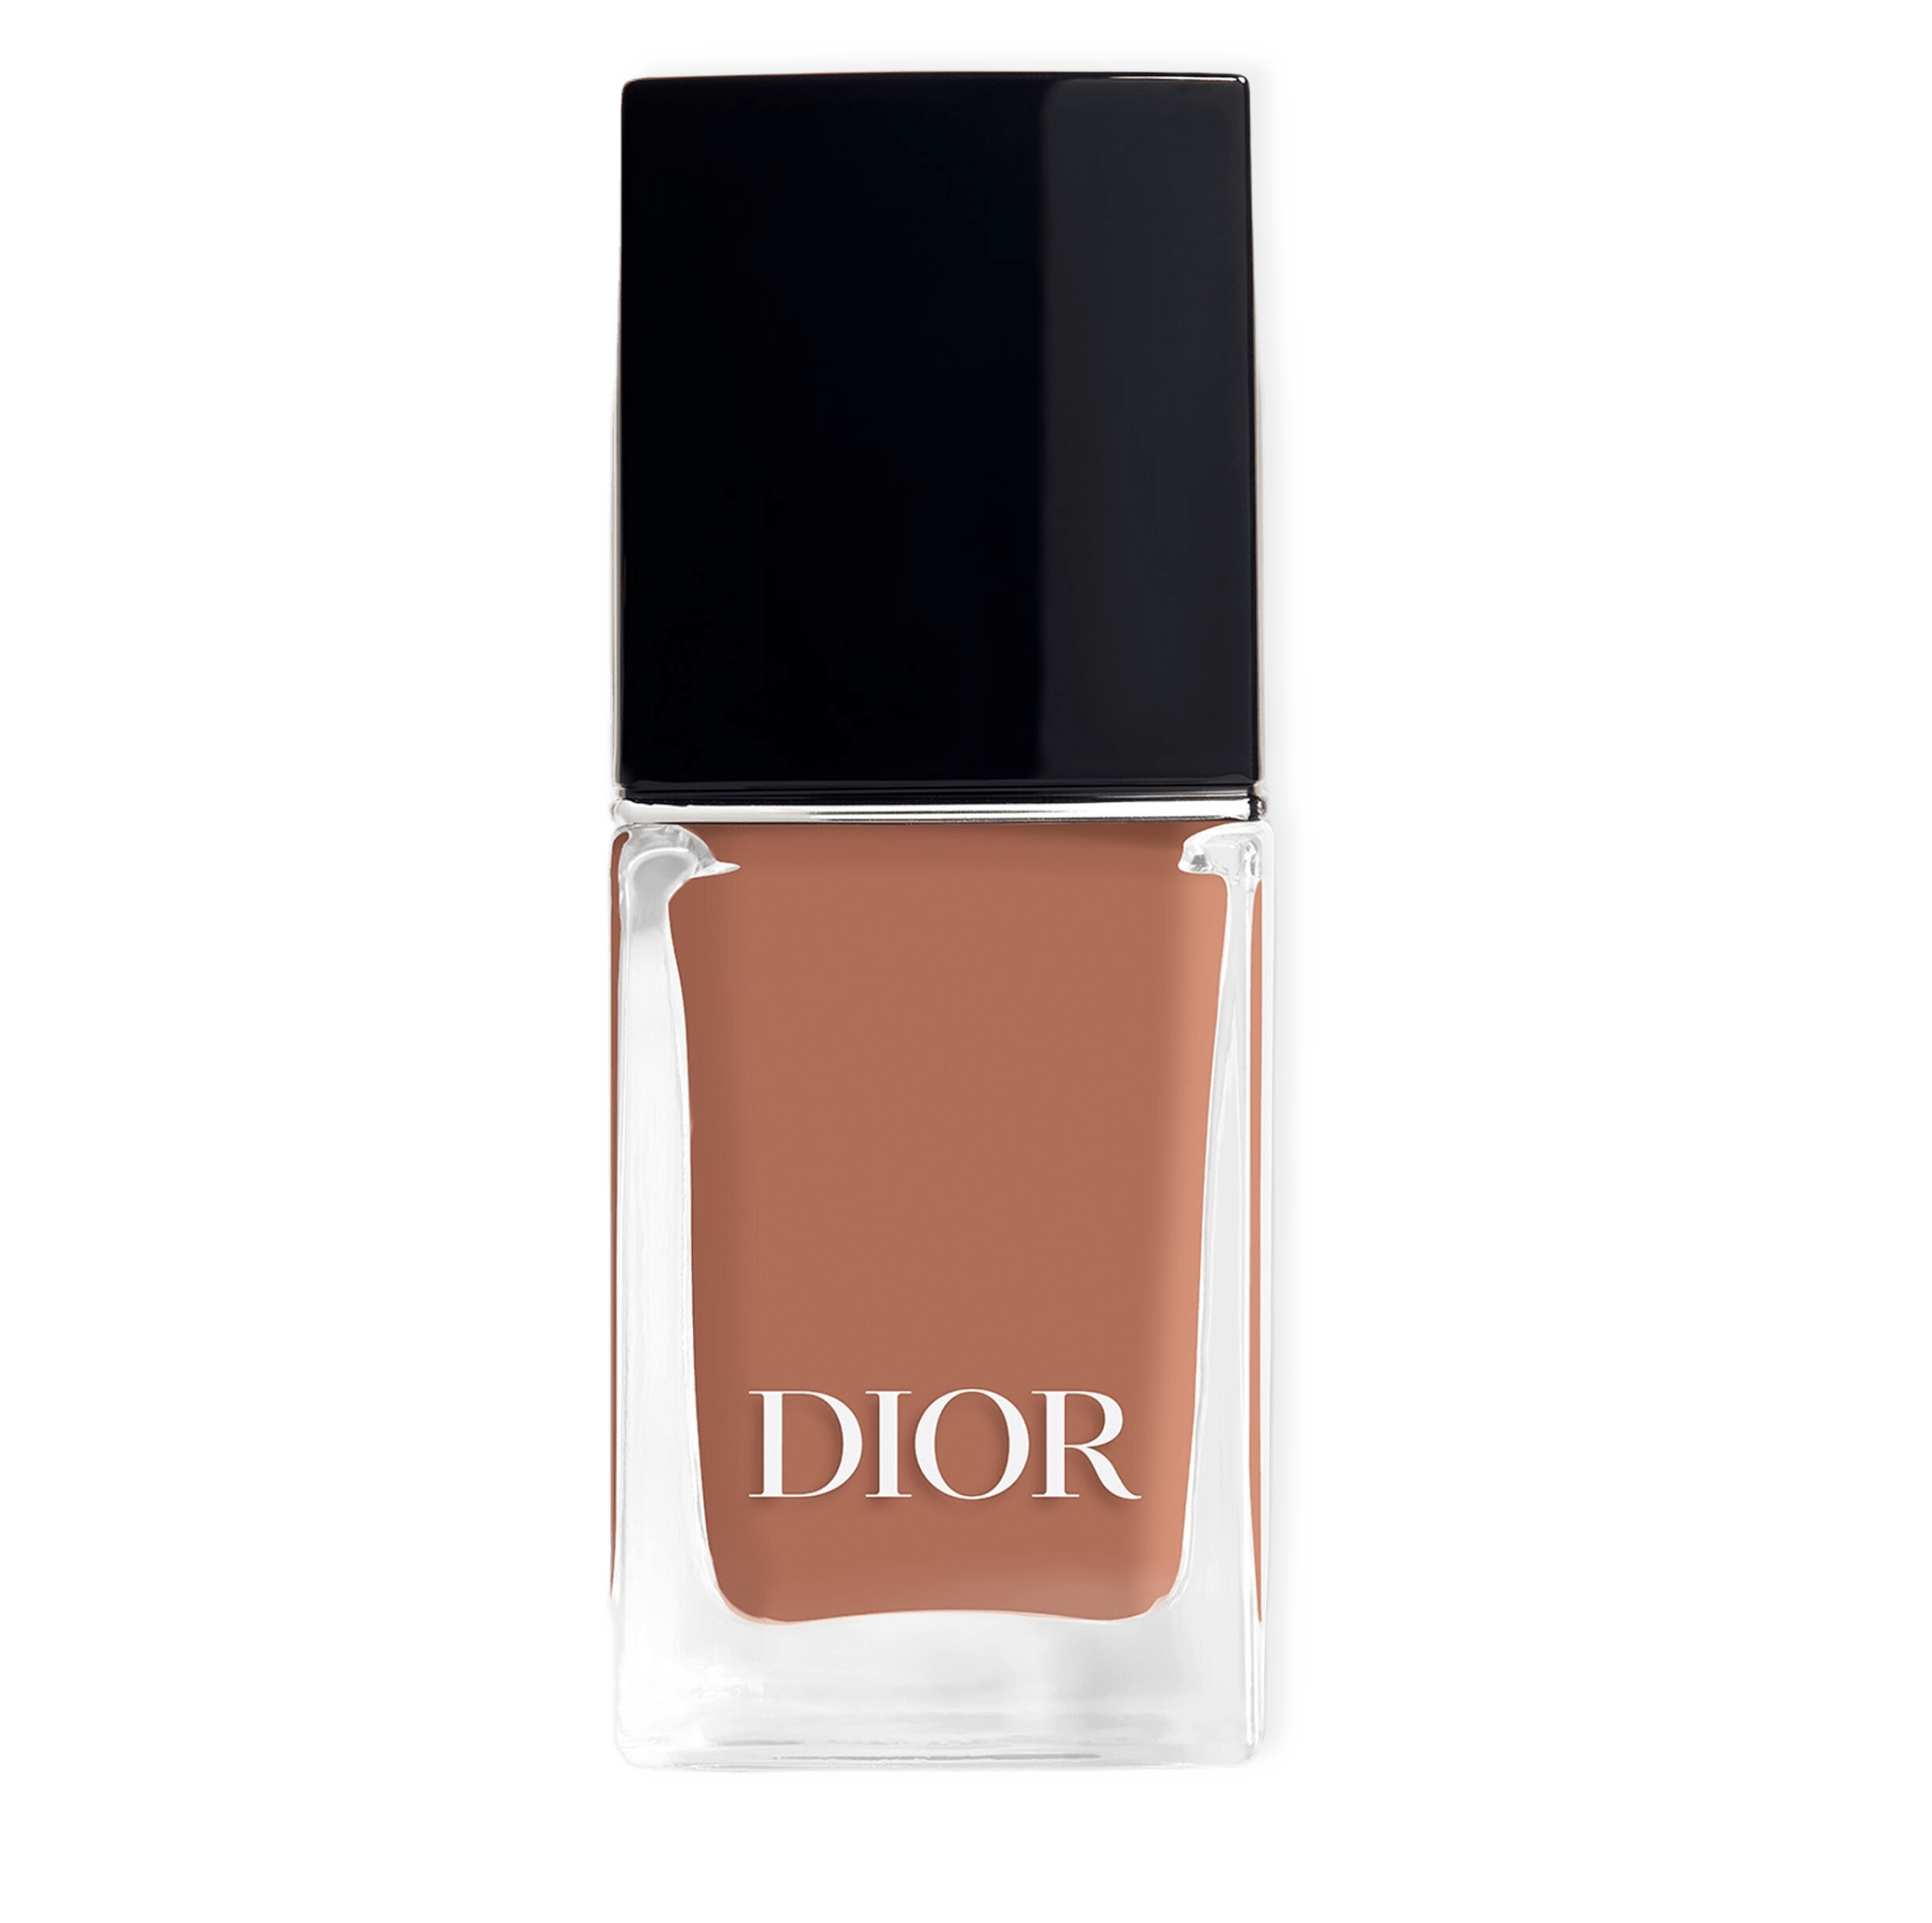 Dior Vernis Nail Polish with Gel Effect and Couture Color